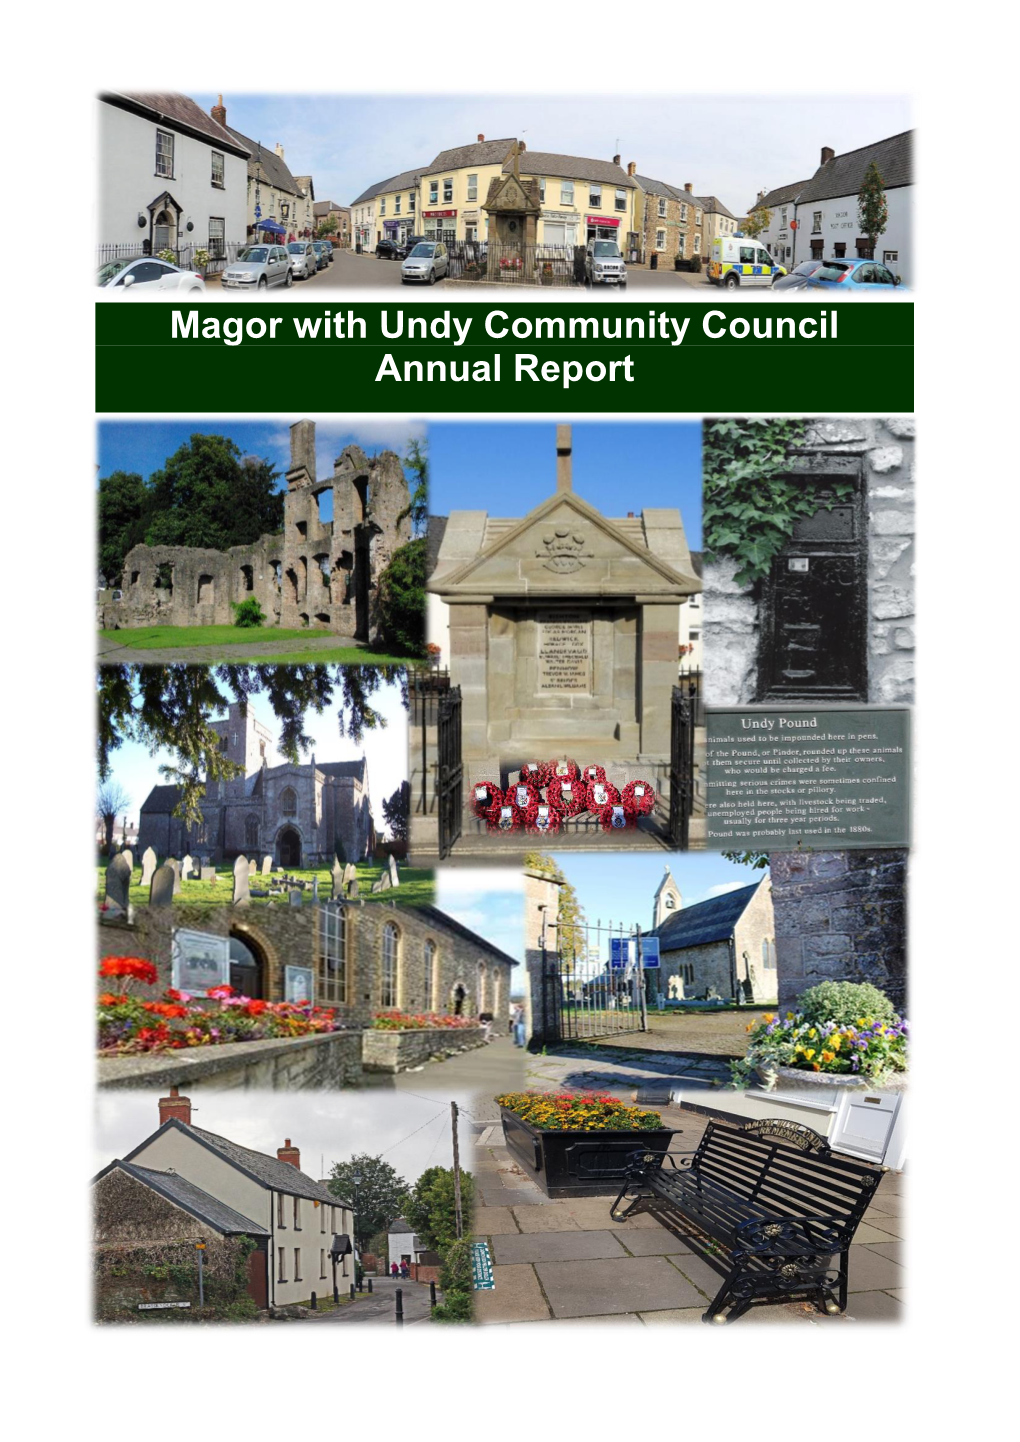 Magor with Undy Community Council Annual Report